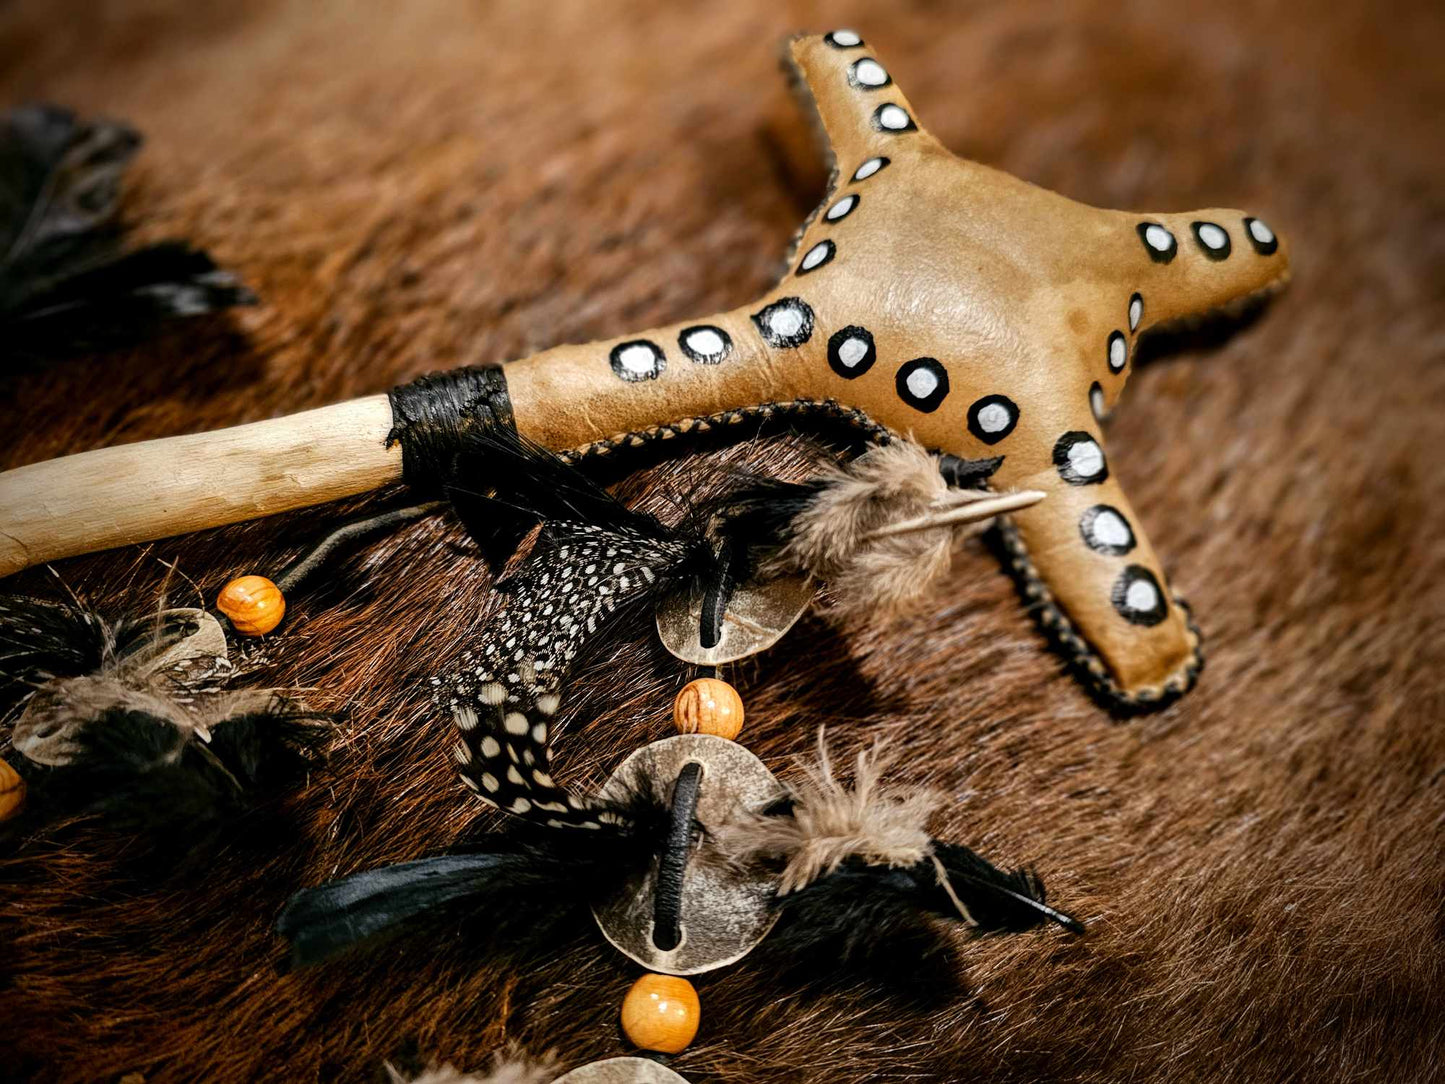 'Four Winds' Elk Skin Medicine Rattle With Spotted Guinea Feathers